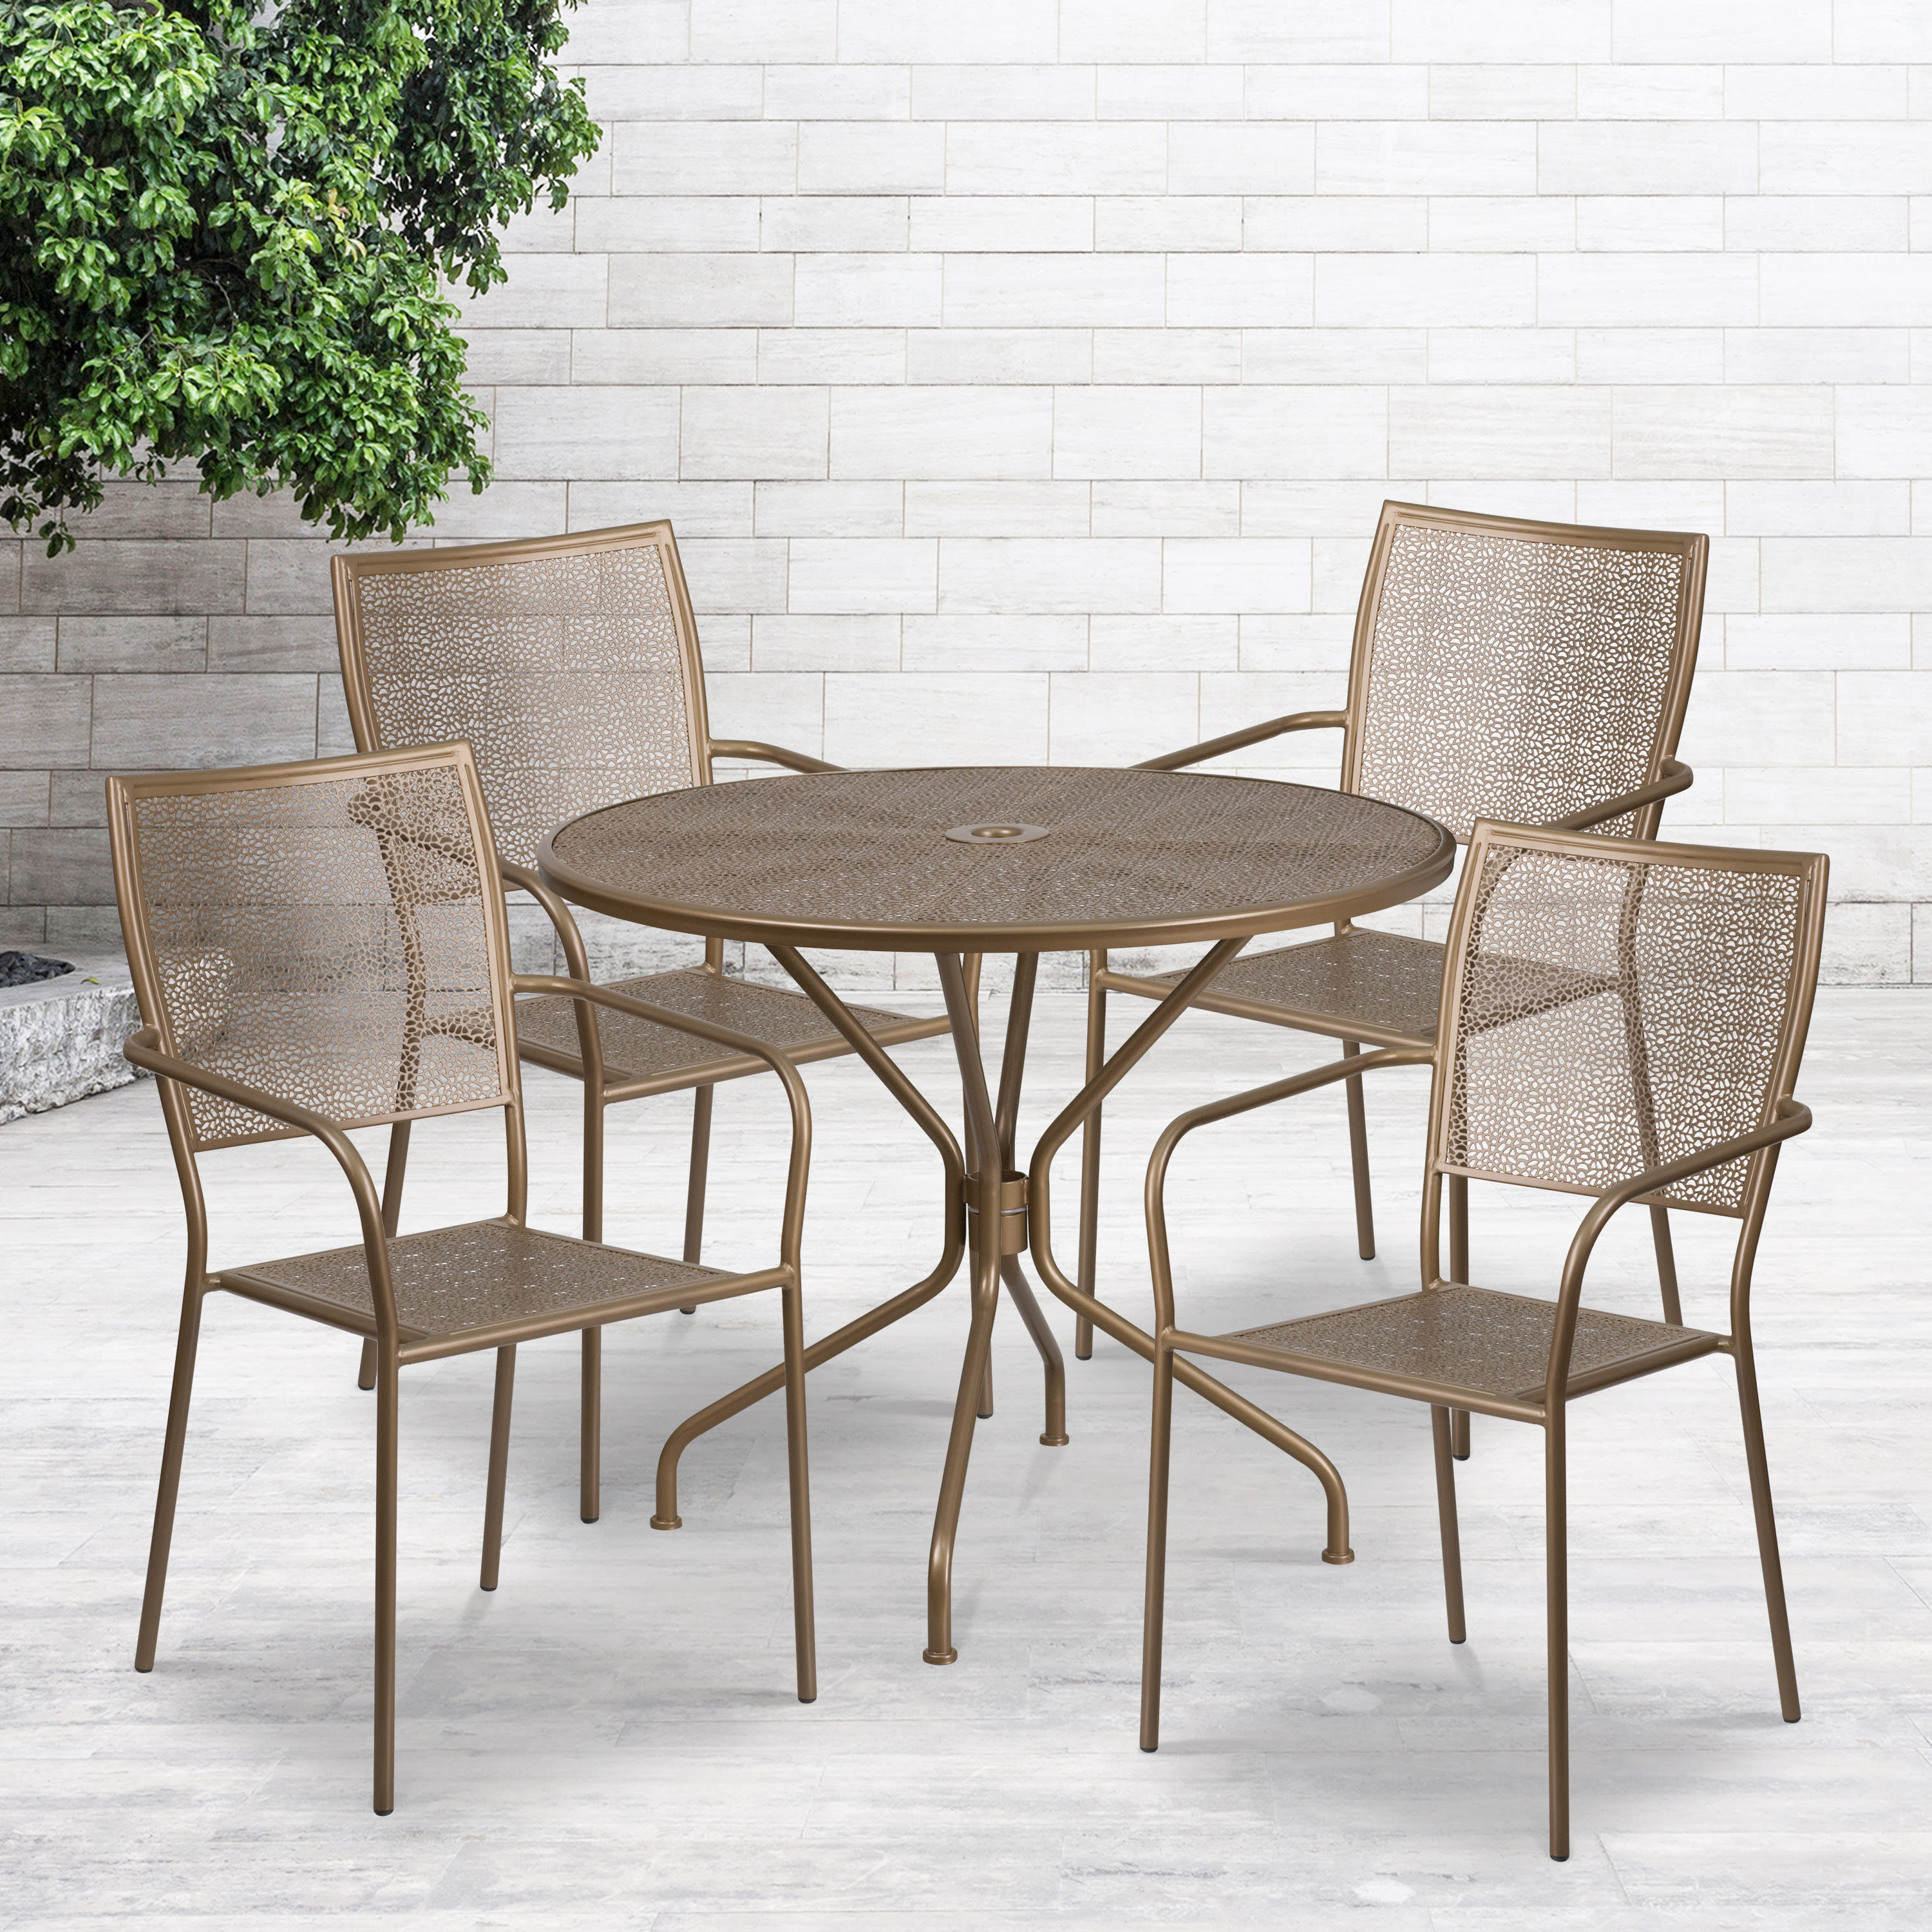 Flash Furniture Commercial Grade 35.25" Round Gold Indoor-Outdoor Steel Patio Table Set with 4 Square Back Chairs - image 1 of 5